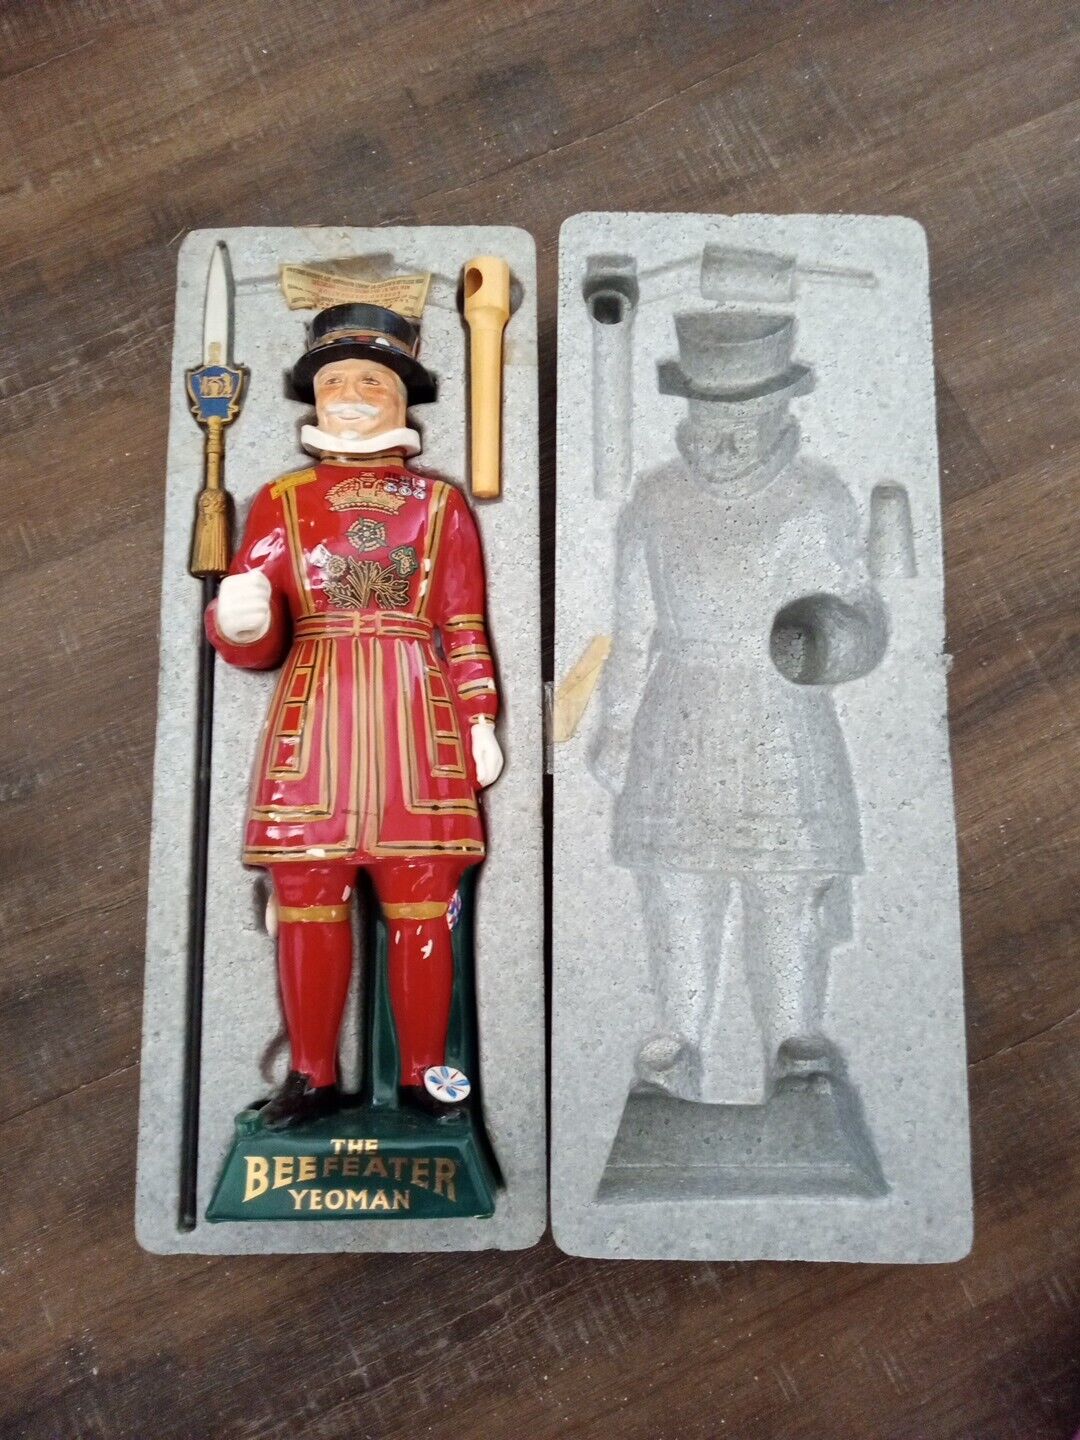 Vintage 1960s The Beefeater Yeoman Gin Ceramic Decanter Bottle with Package